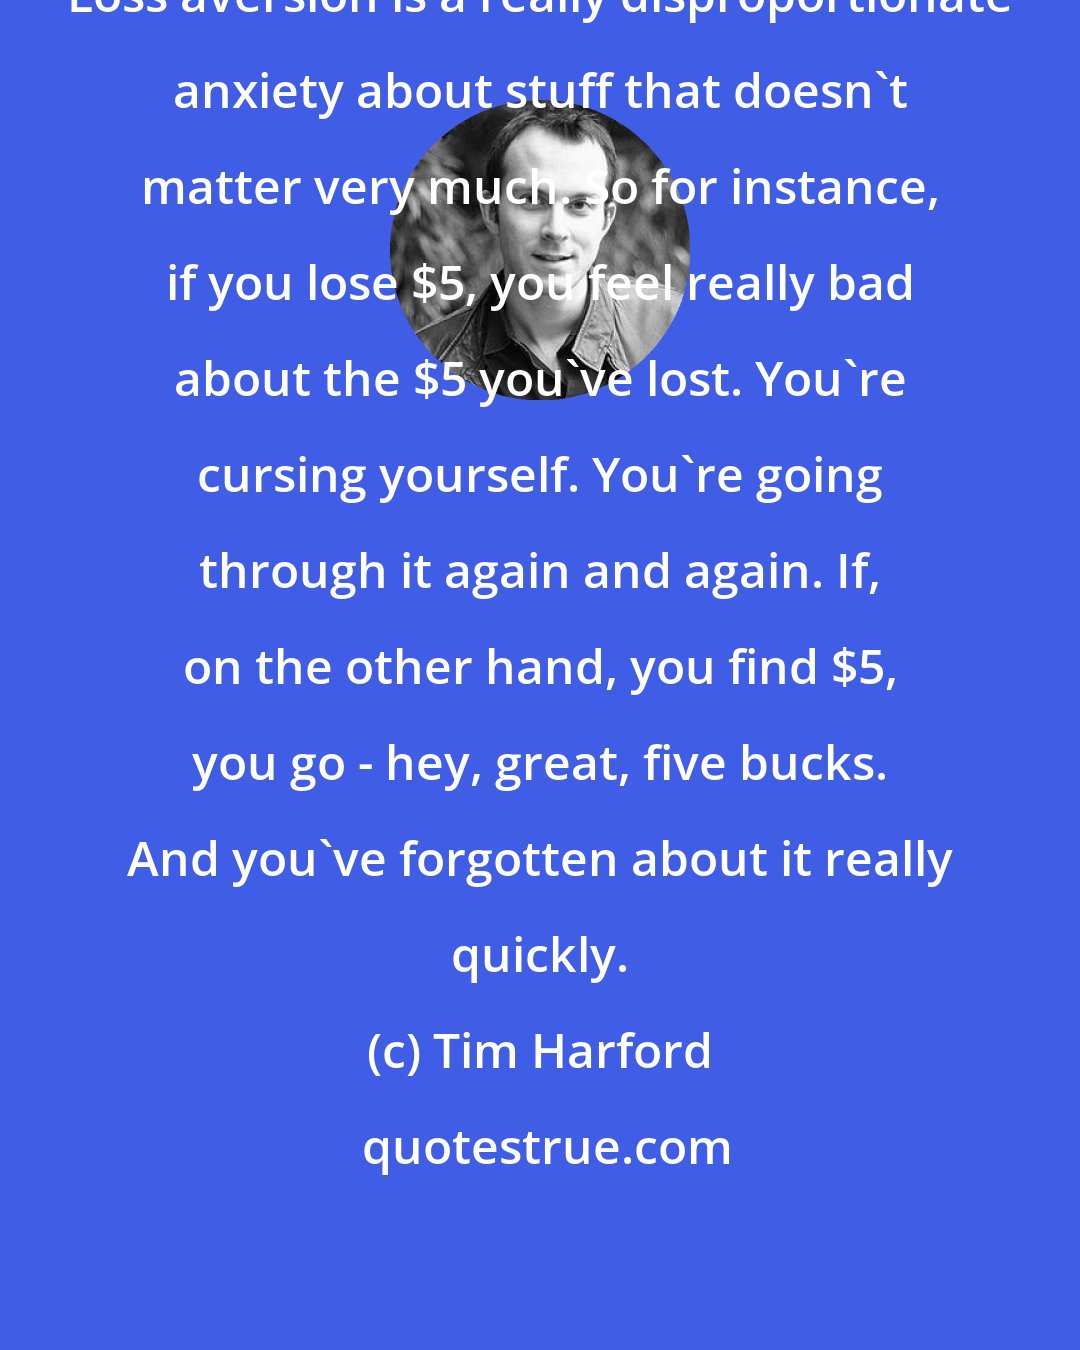 Tim Harford: Loss aversion is a really disproportionate anxiety about stuff that doesn't matter very much. So for instance, if you lose $5, you feel really bad about the $5 you've lost. You're cursing yourself. You're going through it again and again. If, on the other hand, you find $5, you go - hey, great, five bucks. And you've forgotten about it really quickly.